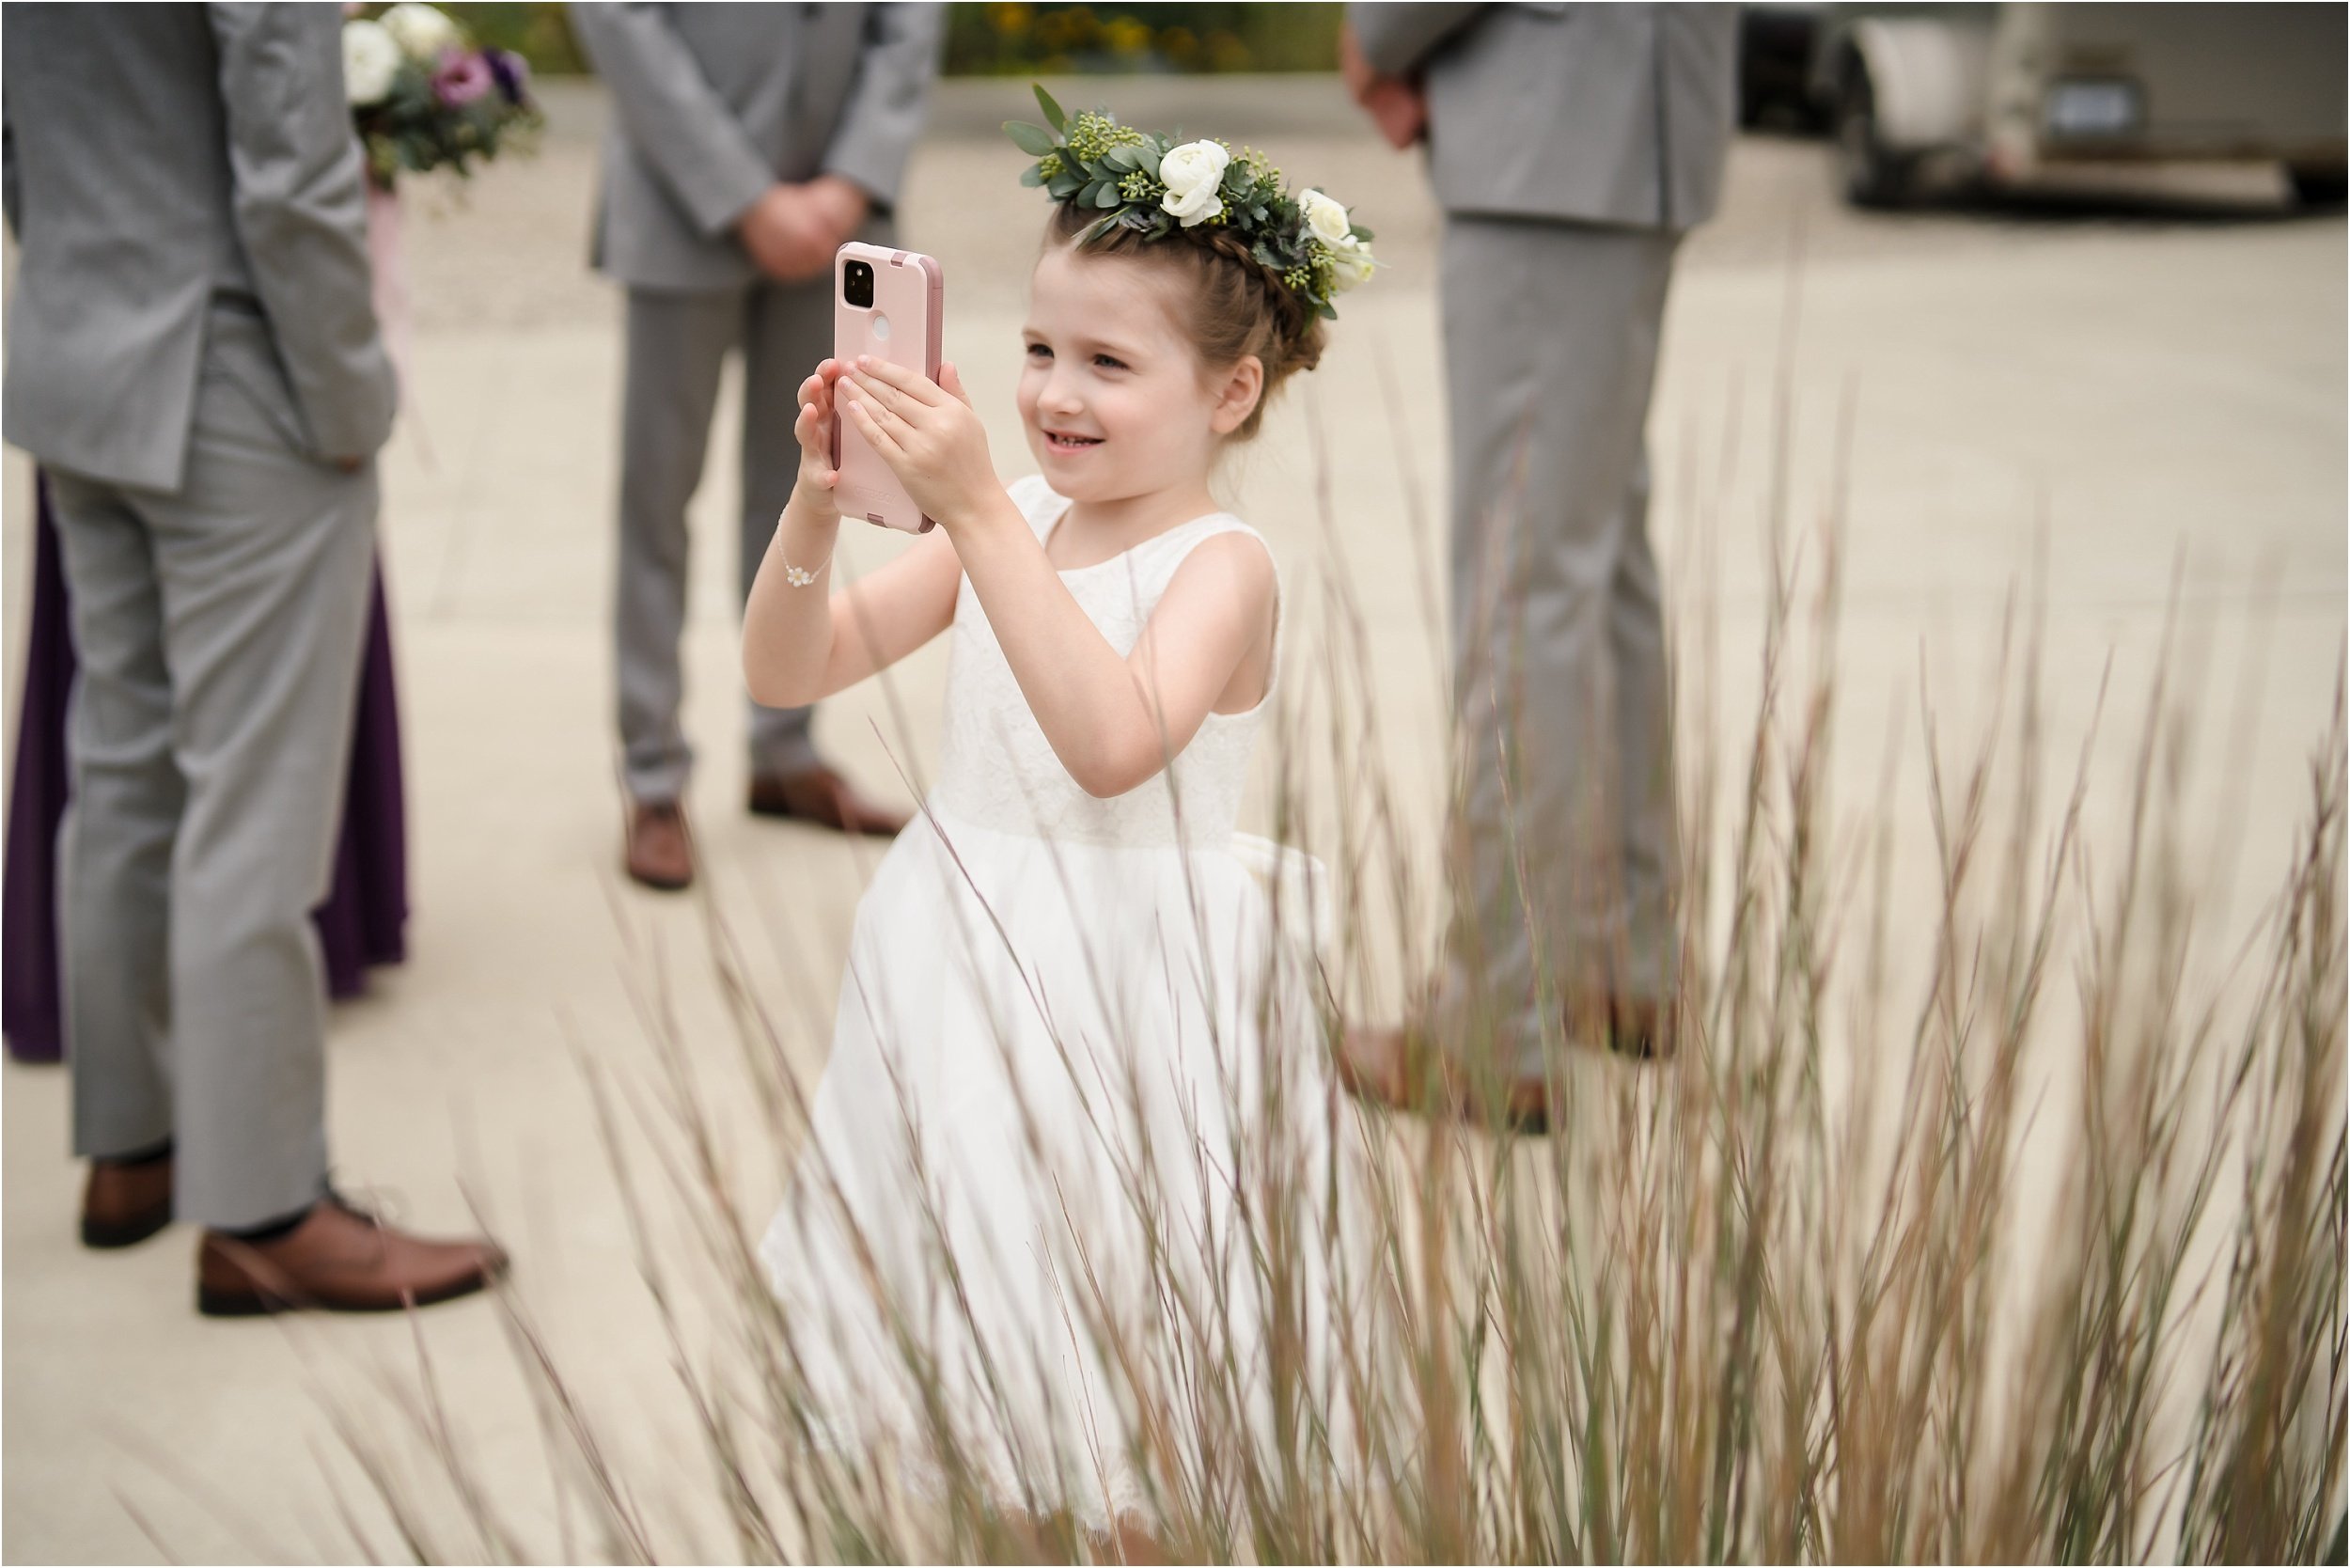  A flowergirl takes a cell phone photo during portraits on a wedding day.  